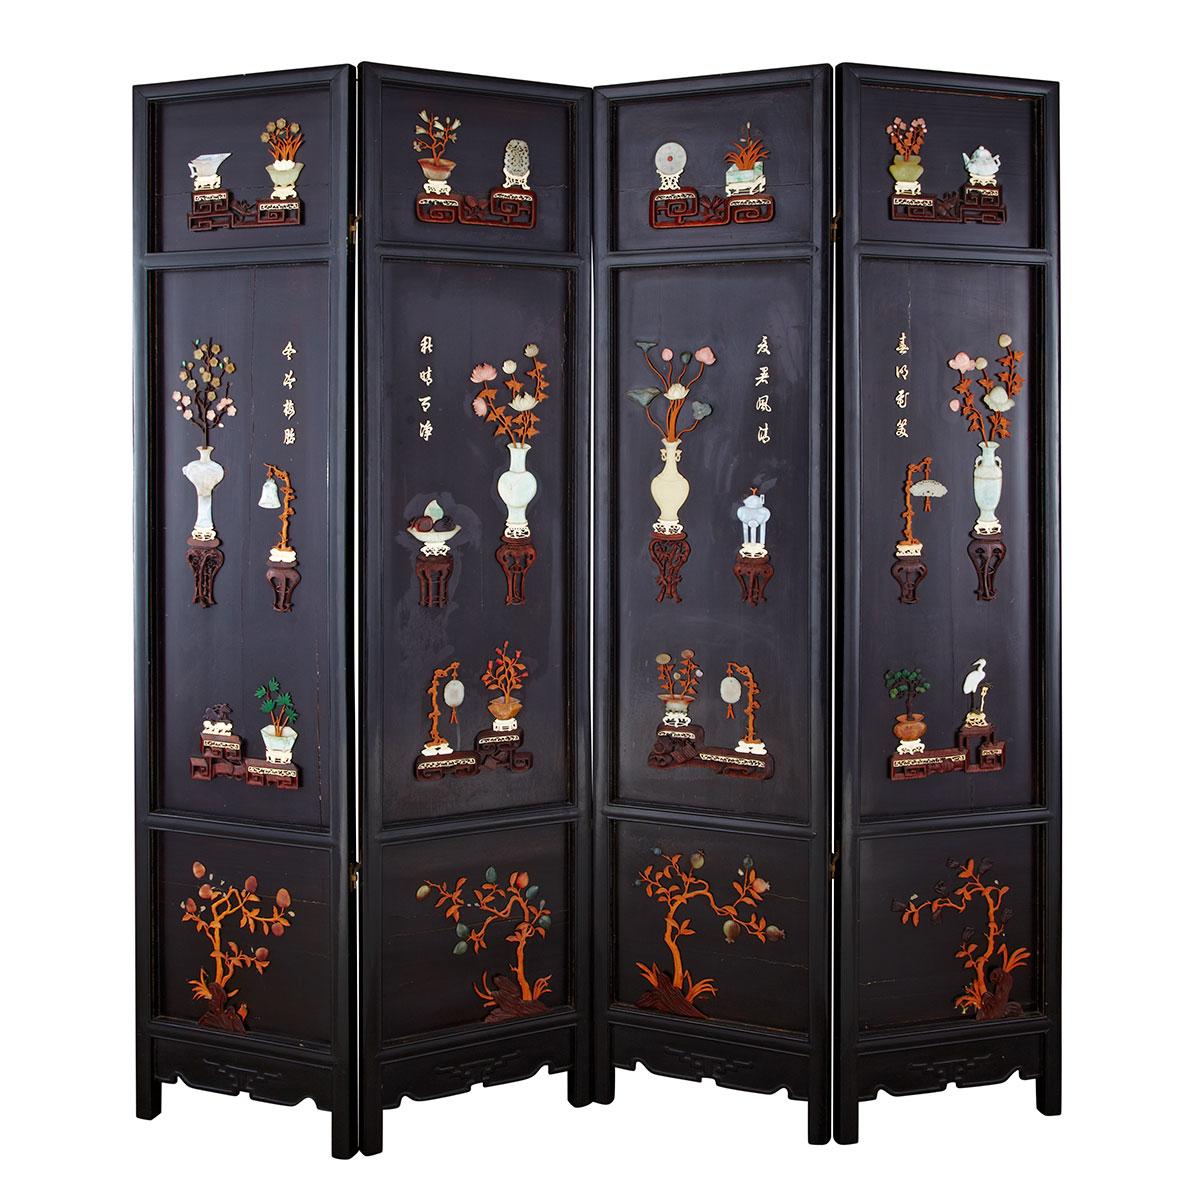 Hardstone Inlay Four Panel Screen, Early 20th Century